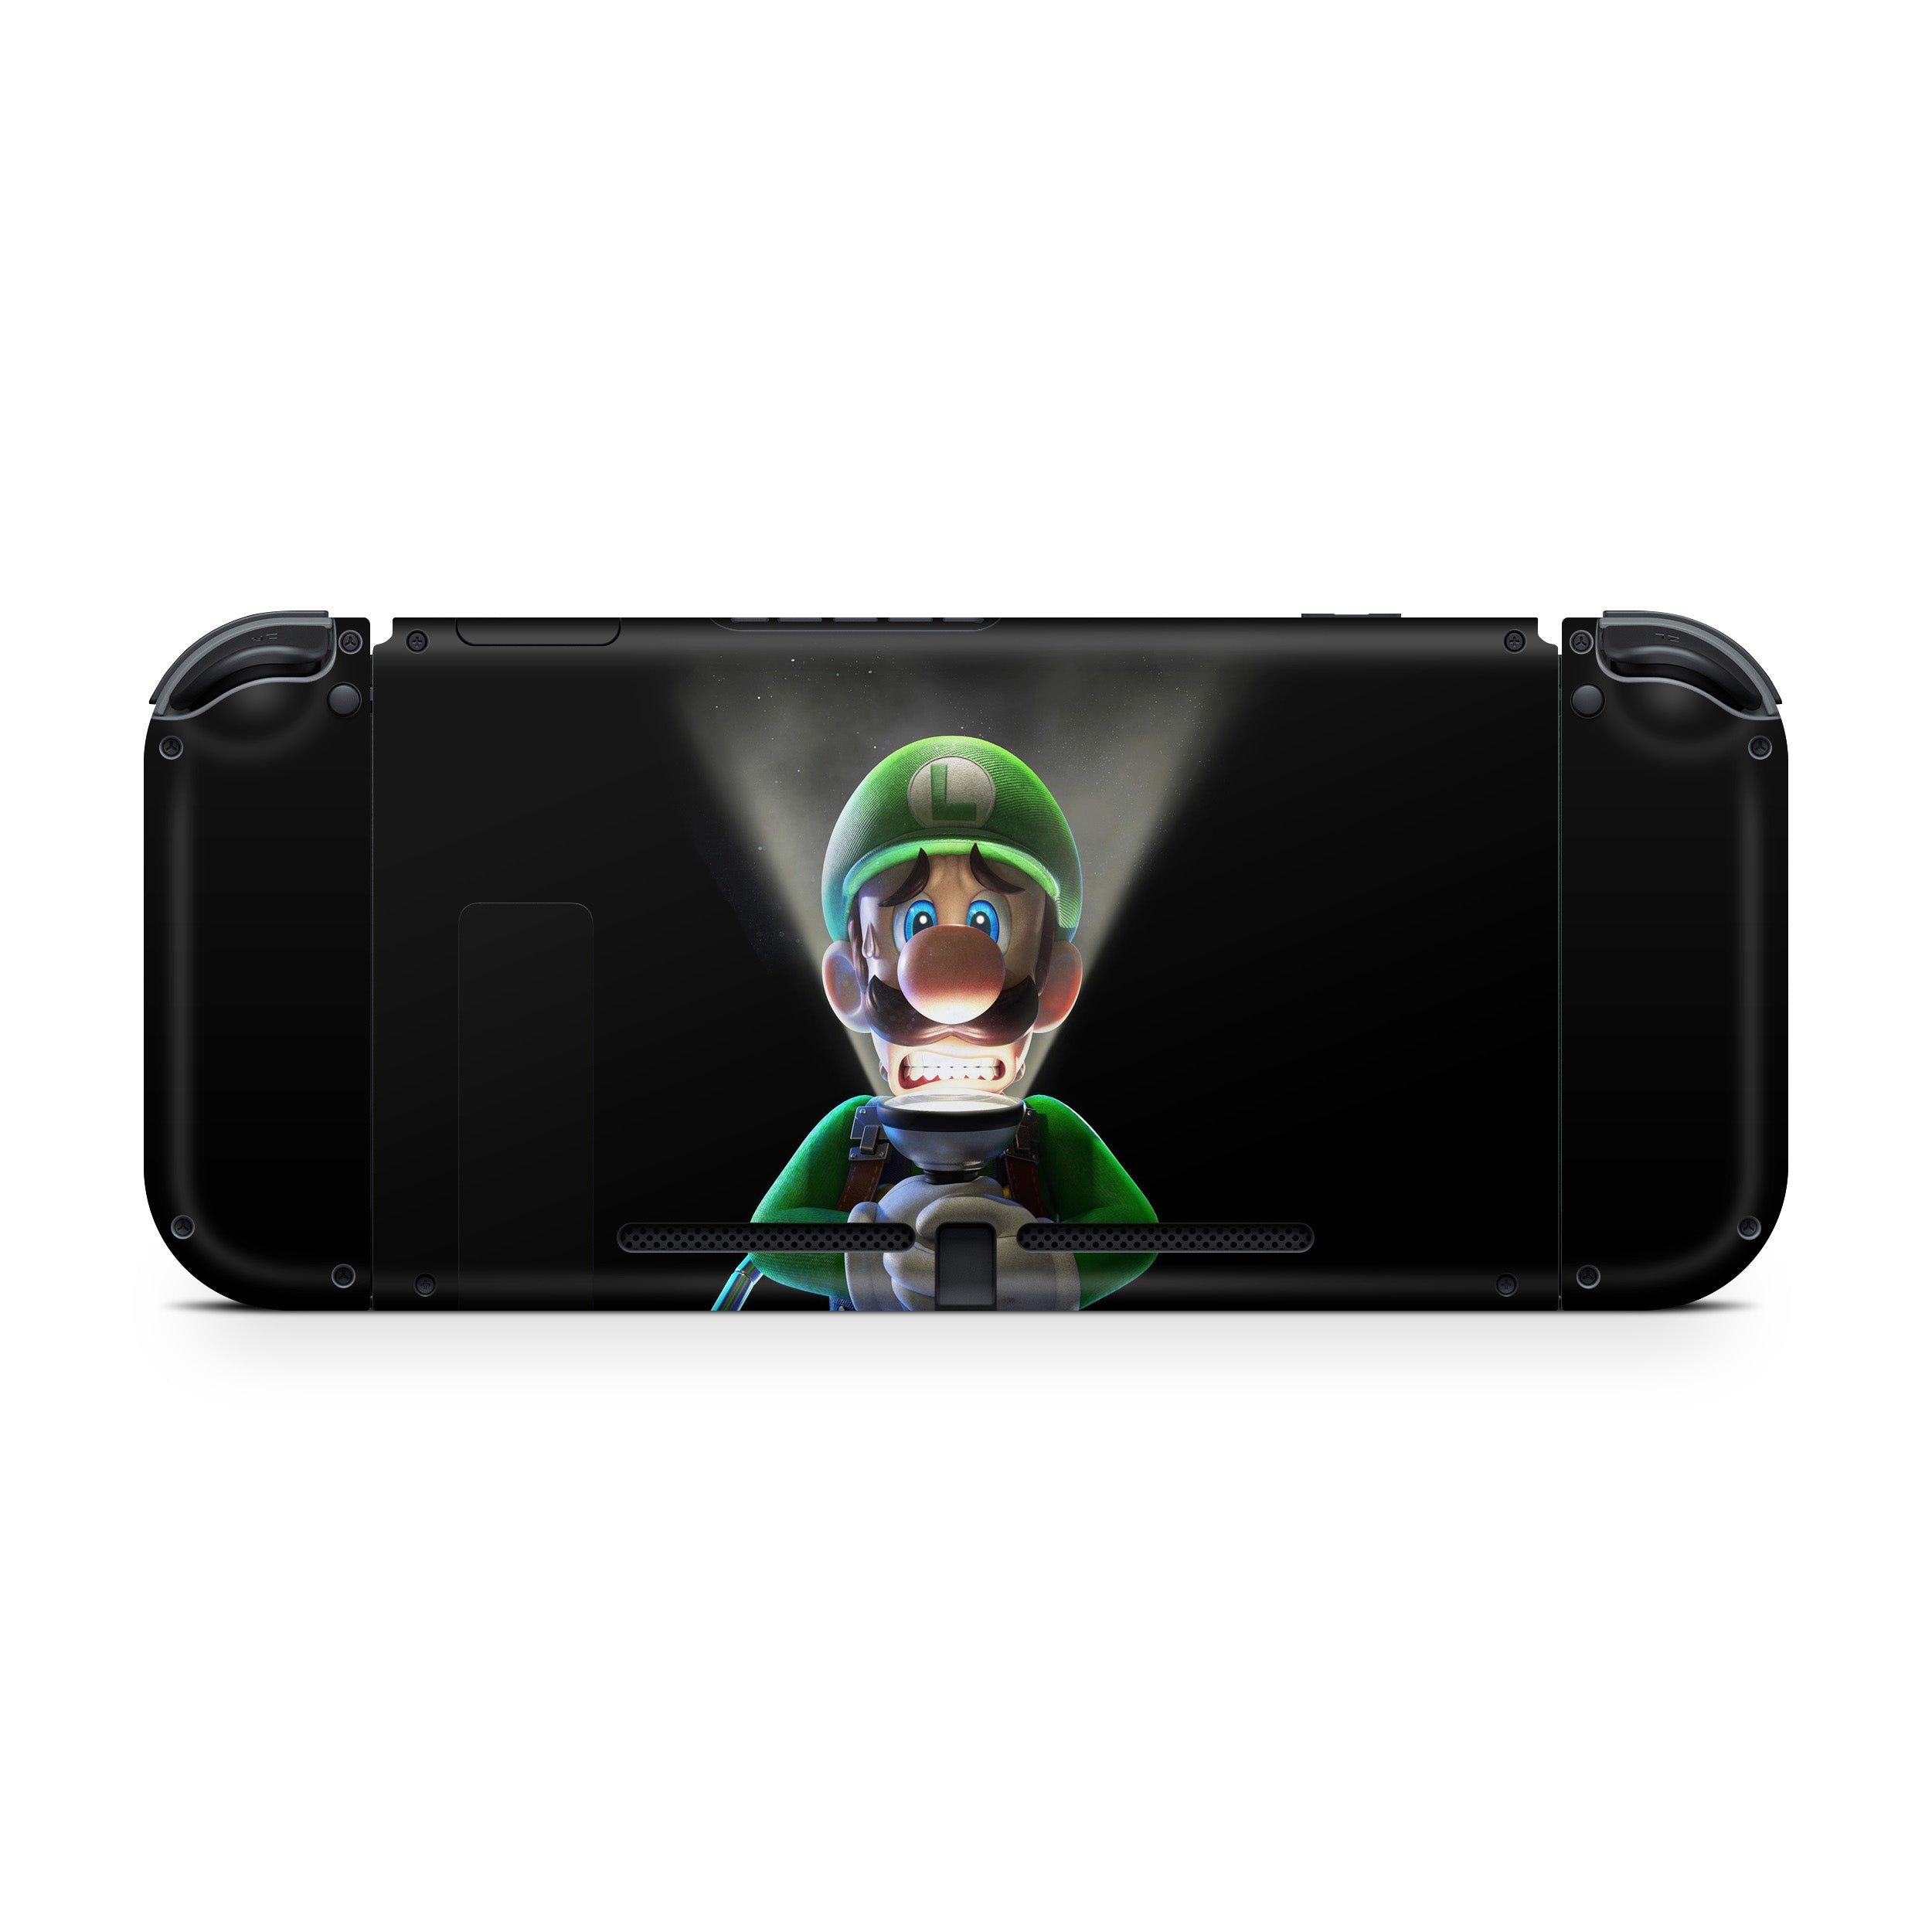 A video game skin featuring a Luigi design for the Nintendo Switch.